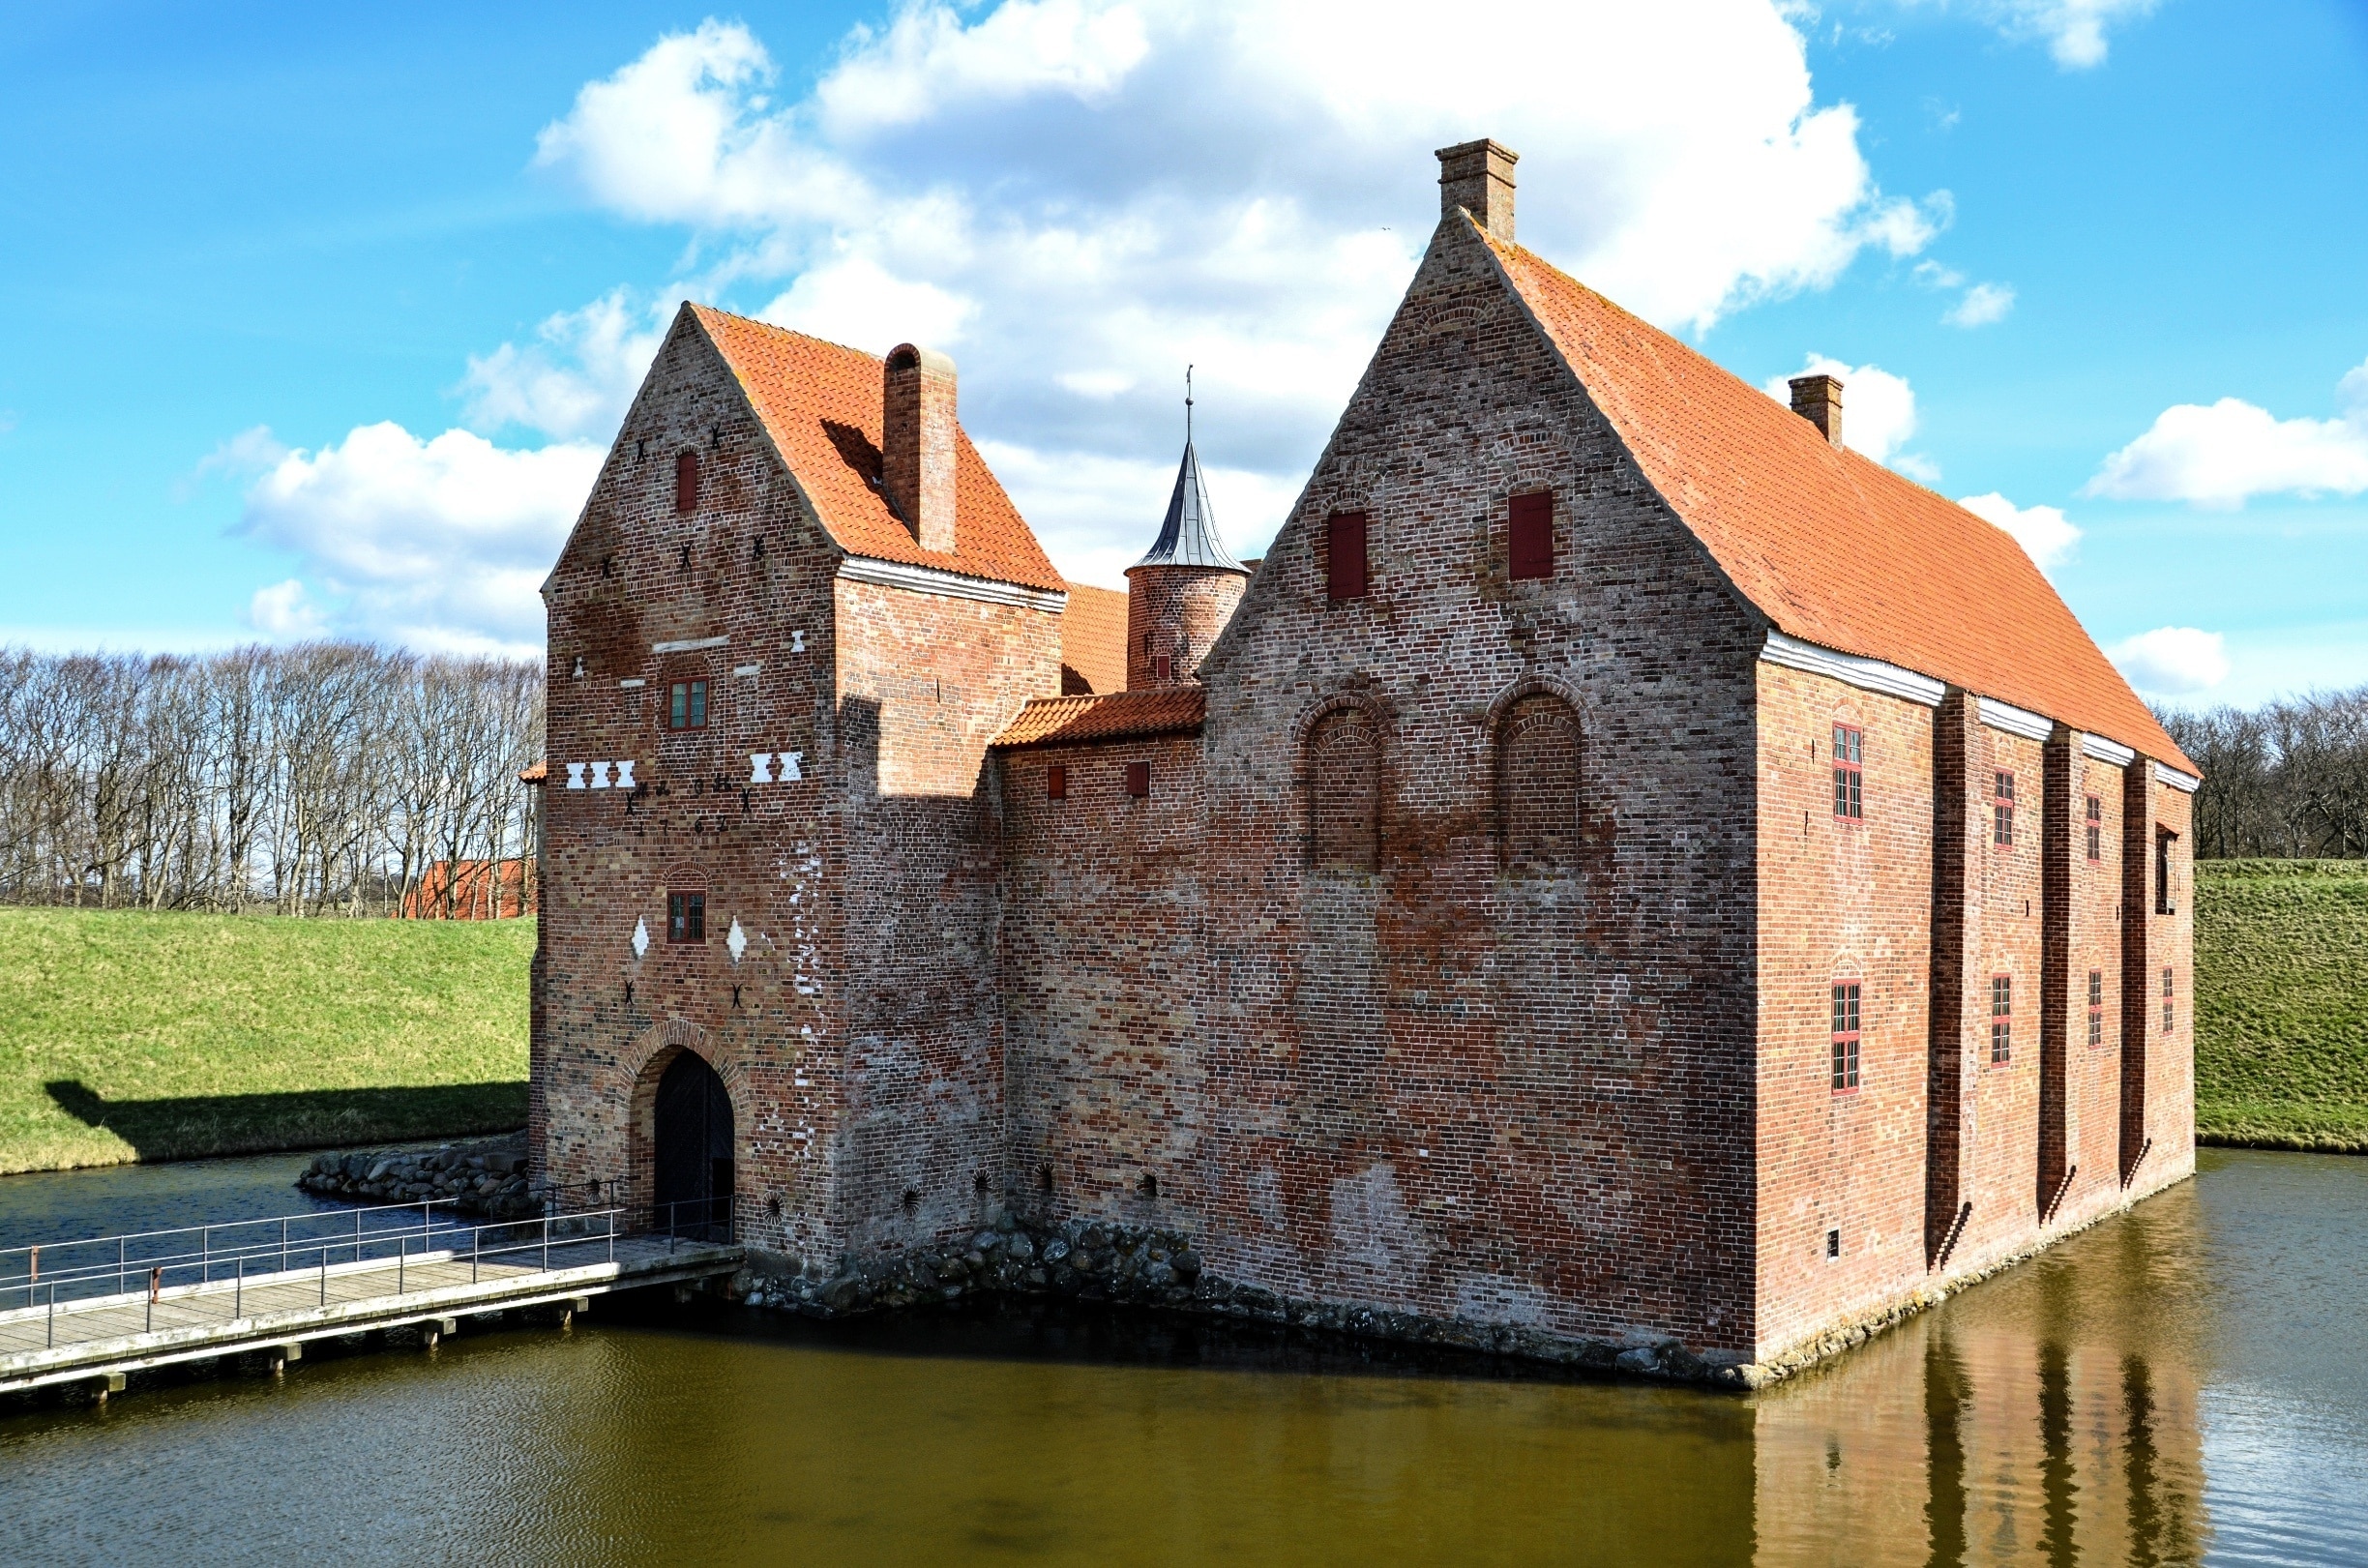 Explore this medieval castle from mid-April to the end of October.